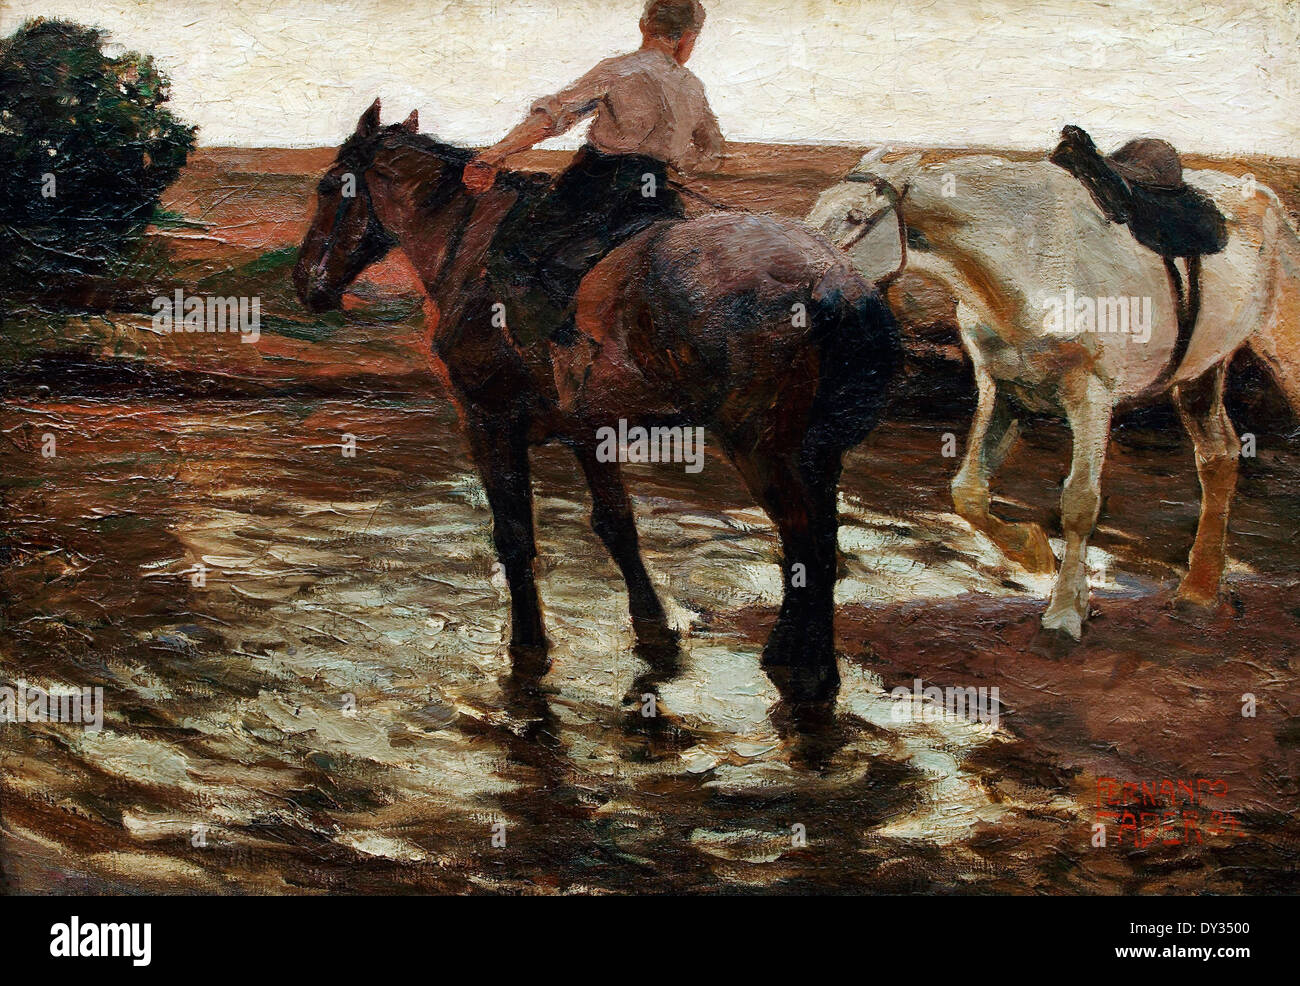 Fernando Fader, Caballos 1904 Oil on canvas. National Museum of Fine Arts in Buenos Aires, Argentina. Stock Photo